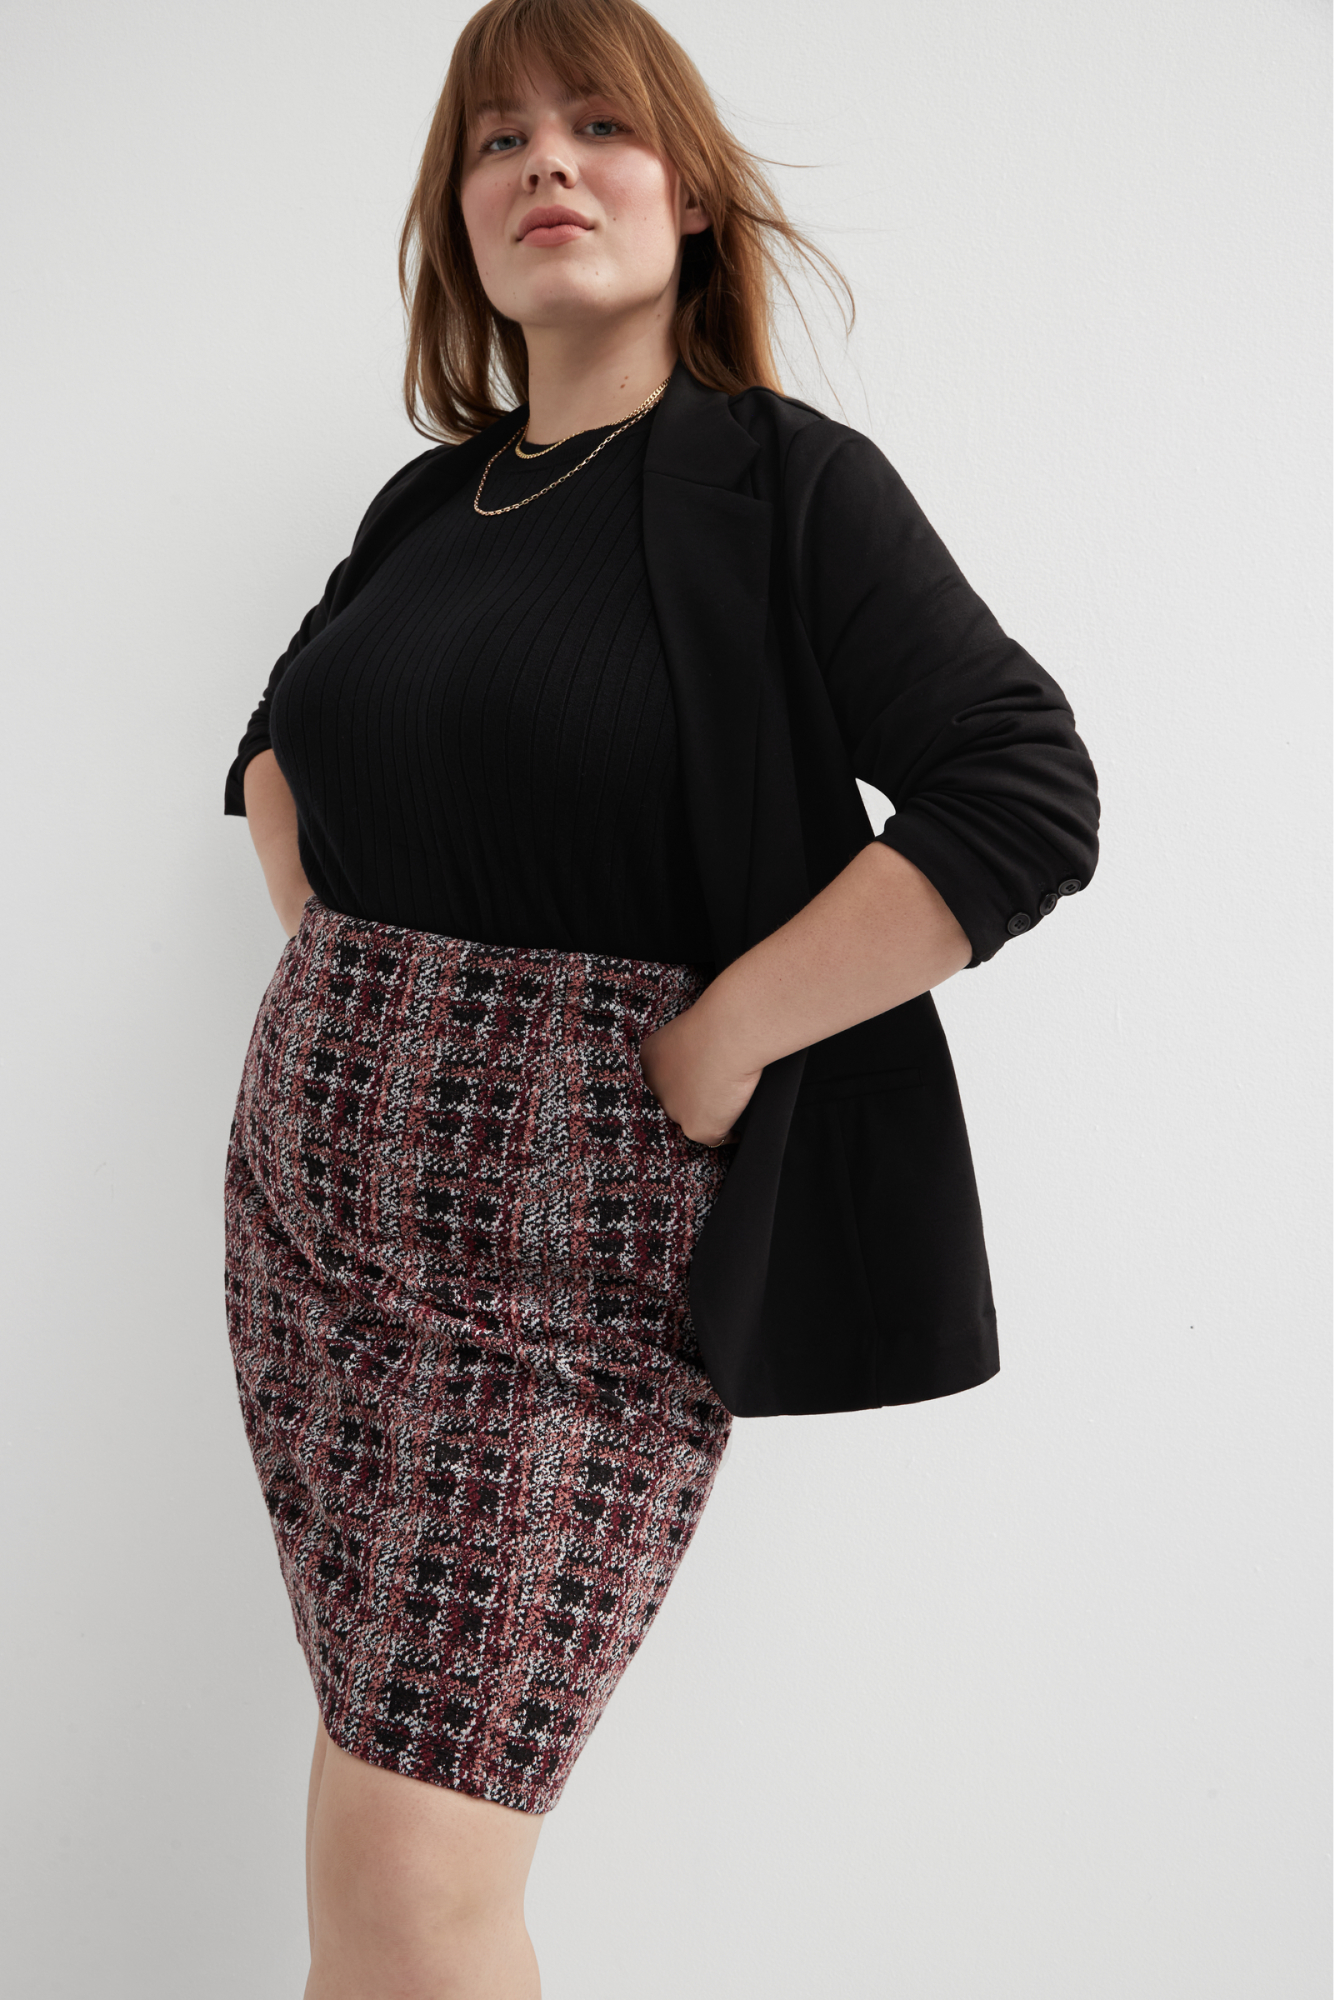 Extended Sizing - Women's Plus Size – Love Style Co